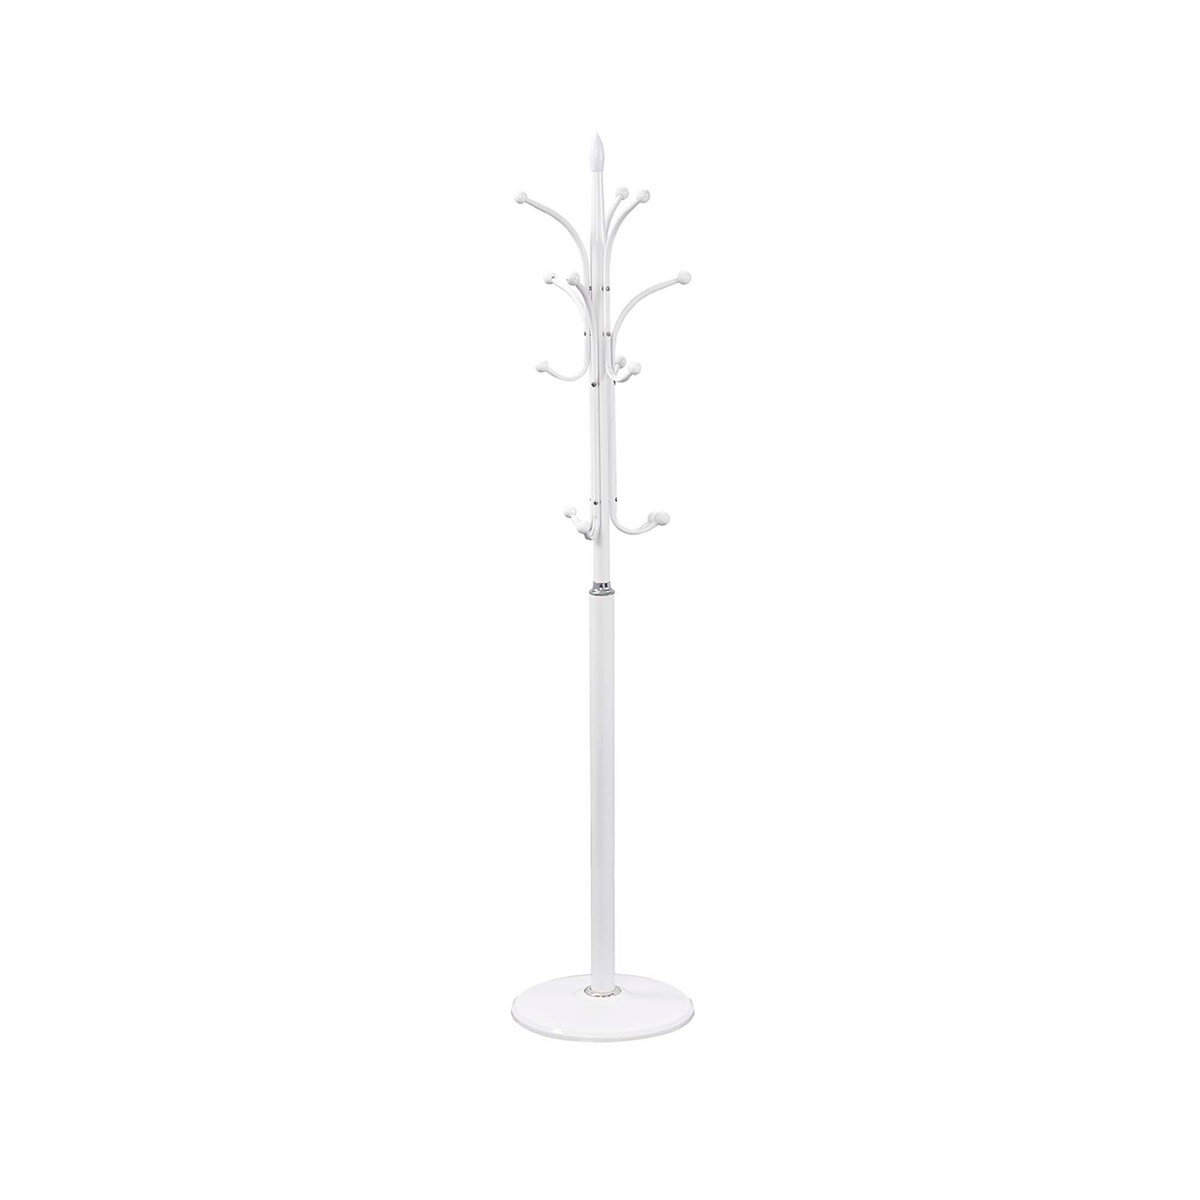 Maple Leaf Metal Coat Hanging Rack Stand Long 6206 White